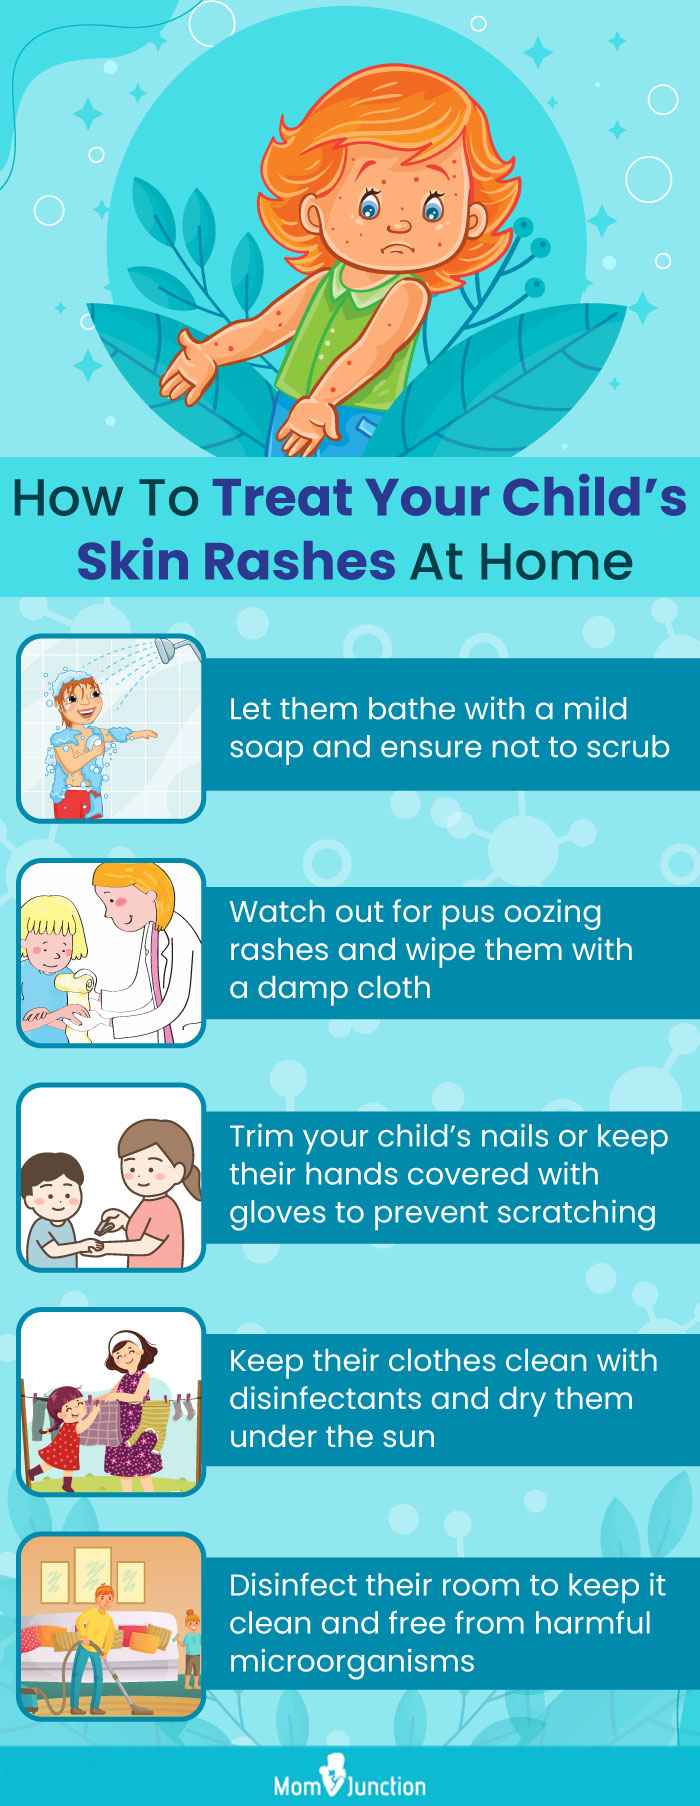 how to treat your child’s skin rashes at home [infographic]